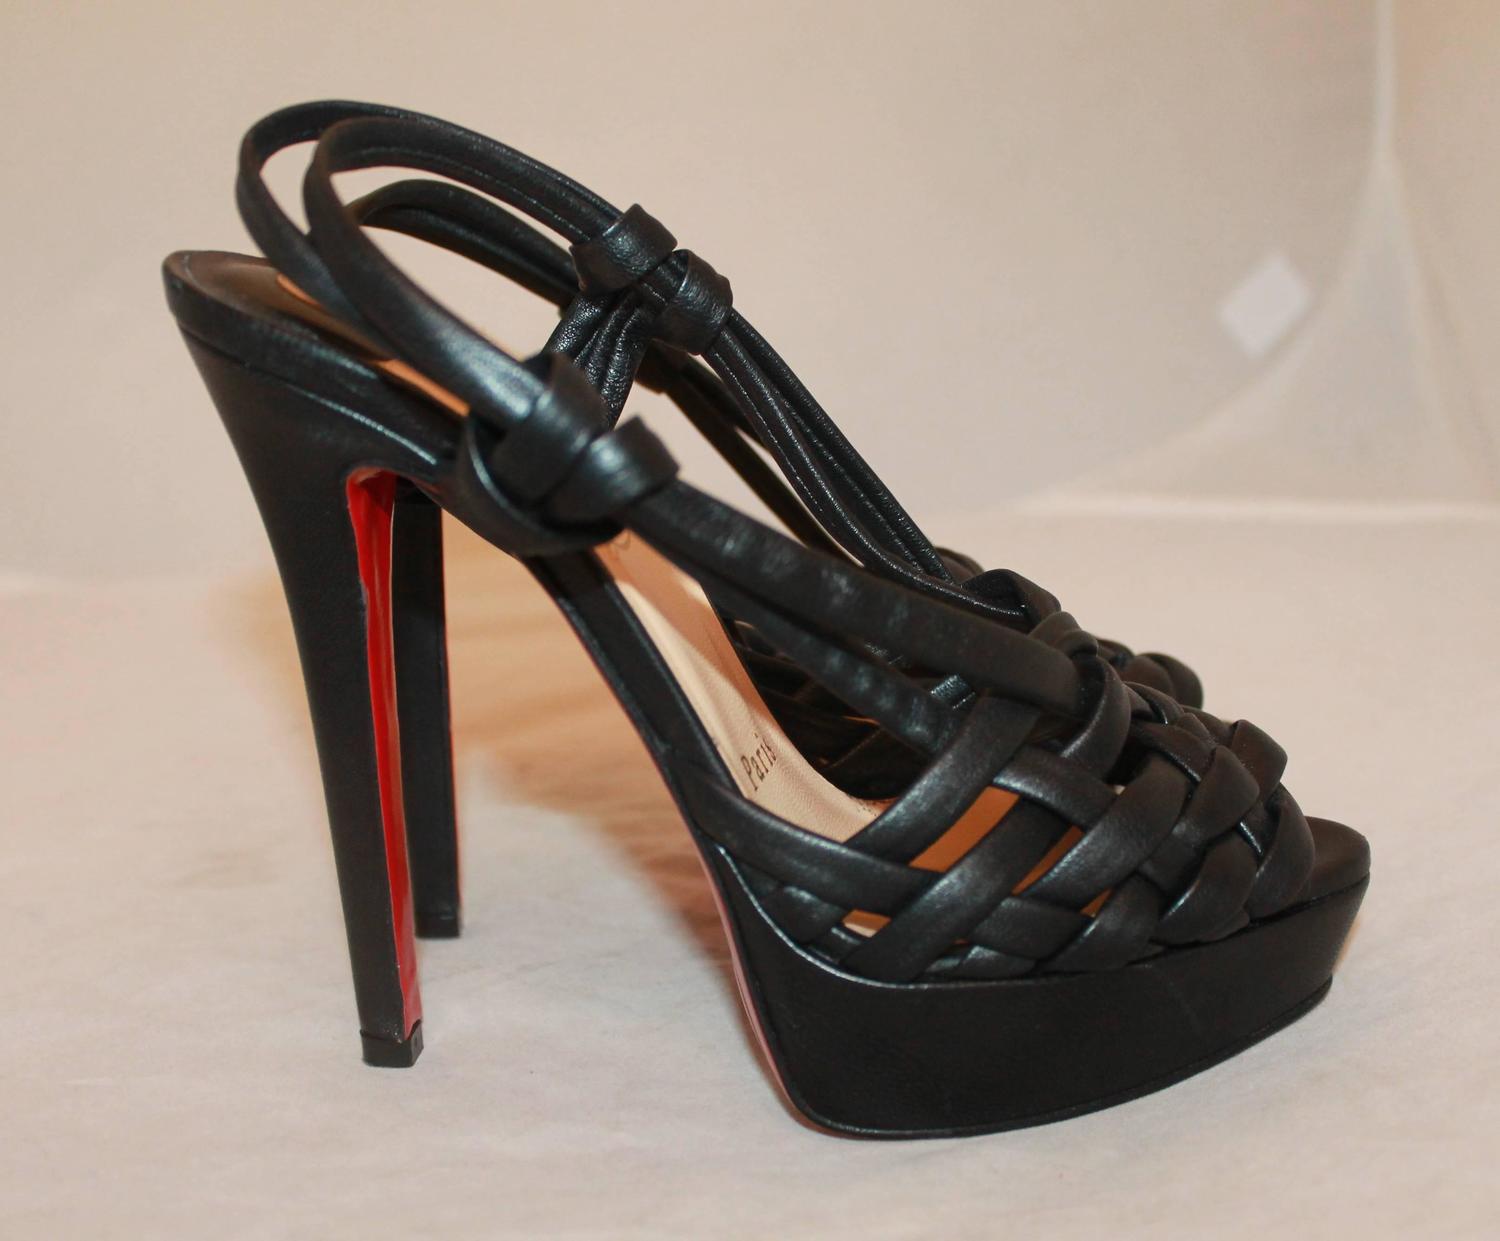 Christian Louboutin Black Leather Strappy Platform Heels - 36 For Sale at 1stdibs